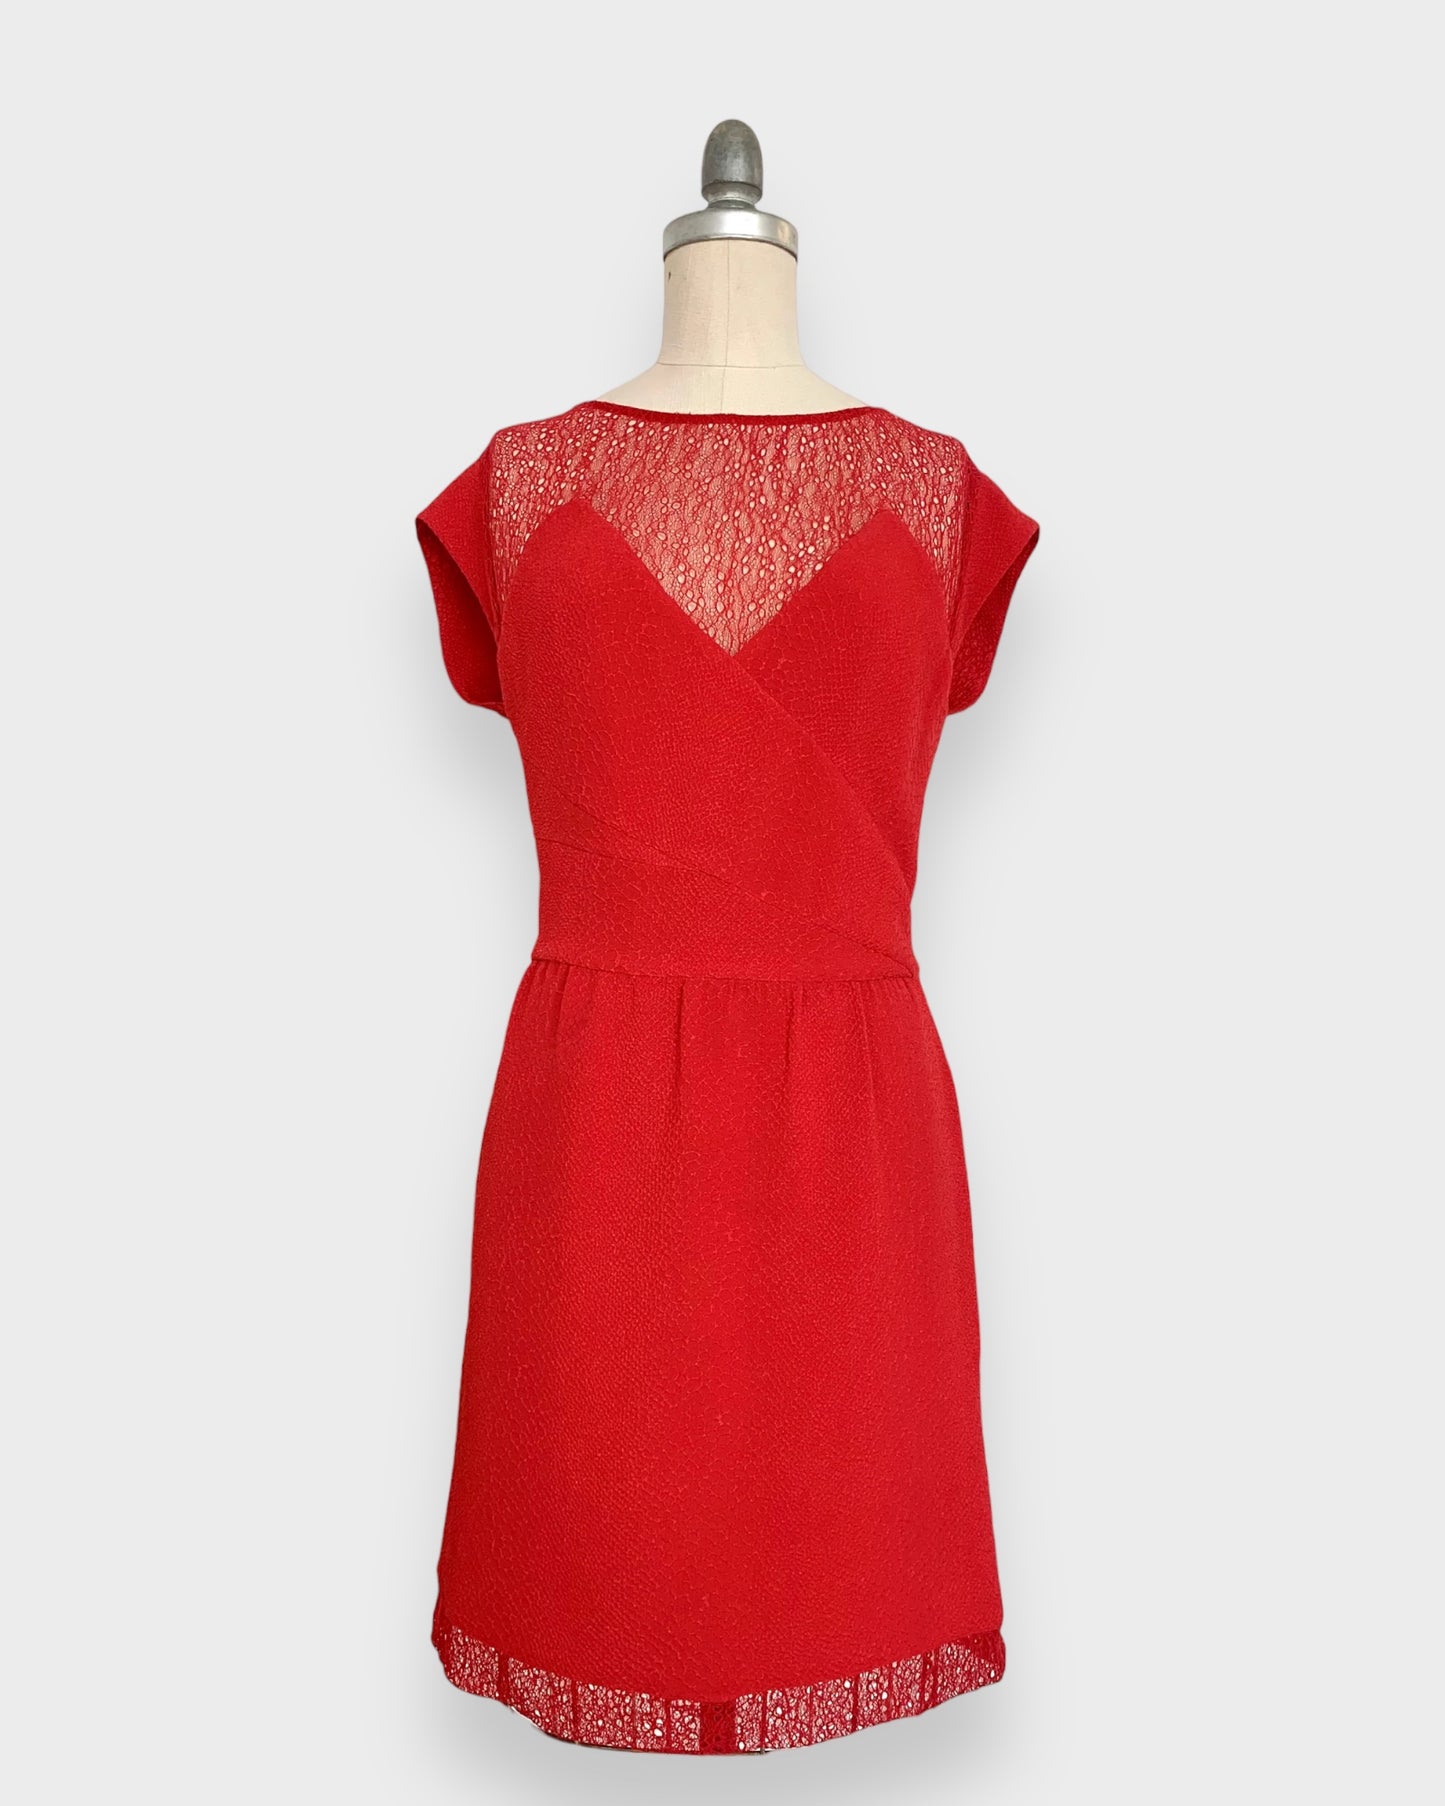 The Kooples red lace dress